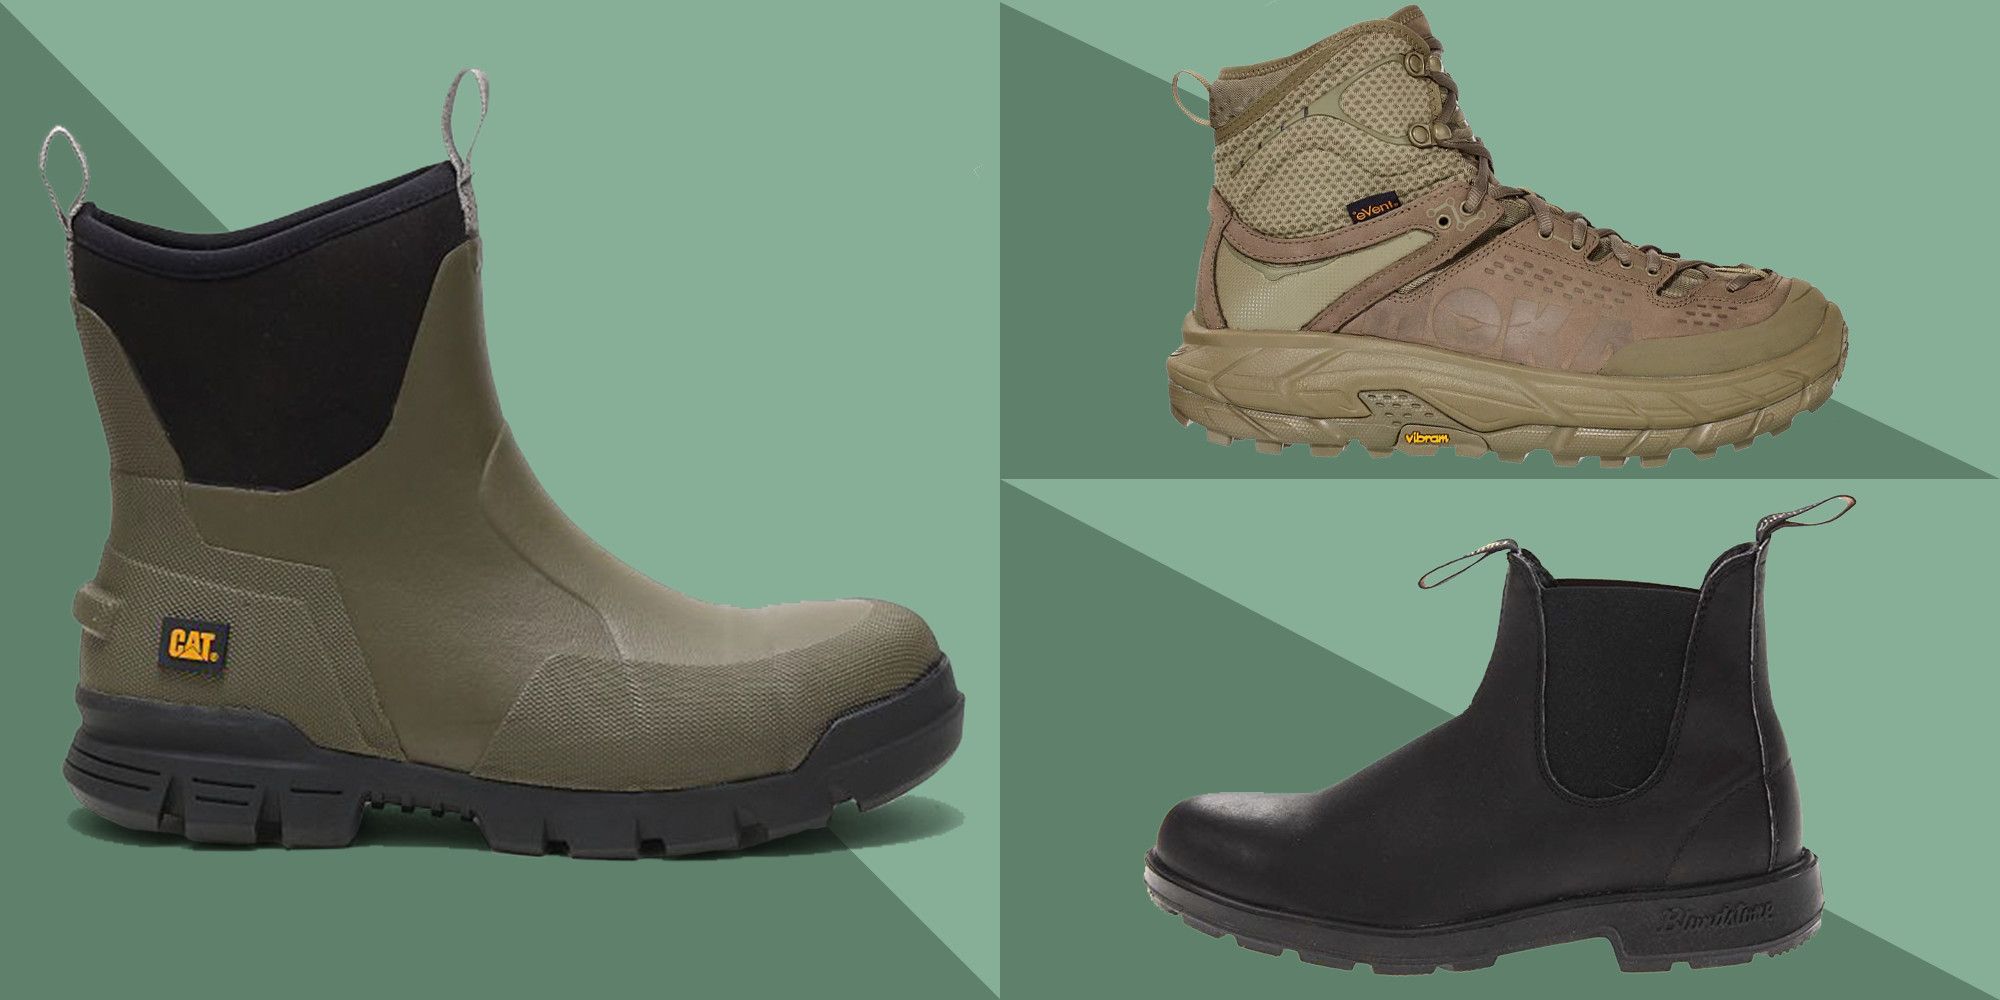 waterproof boots for working outside